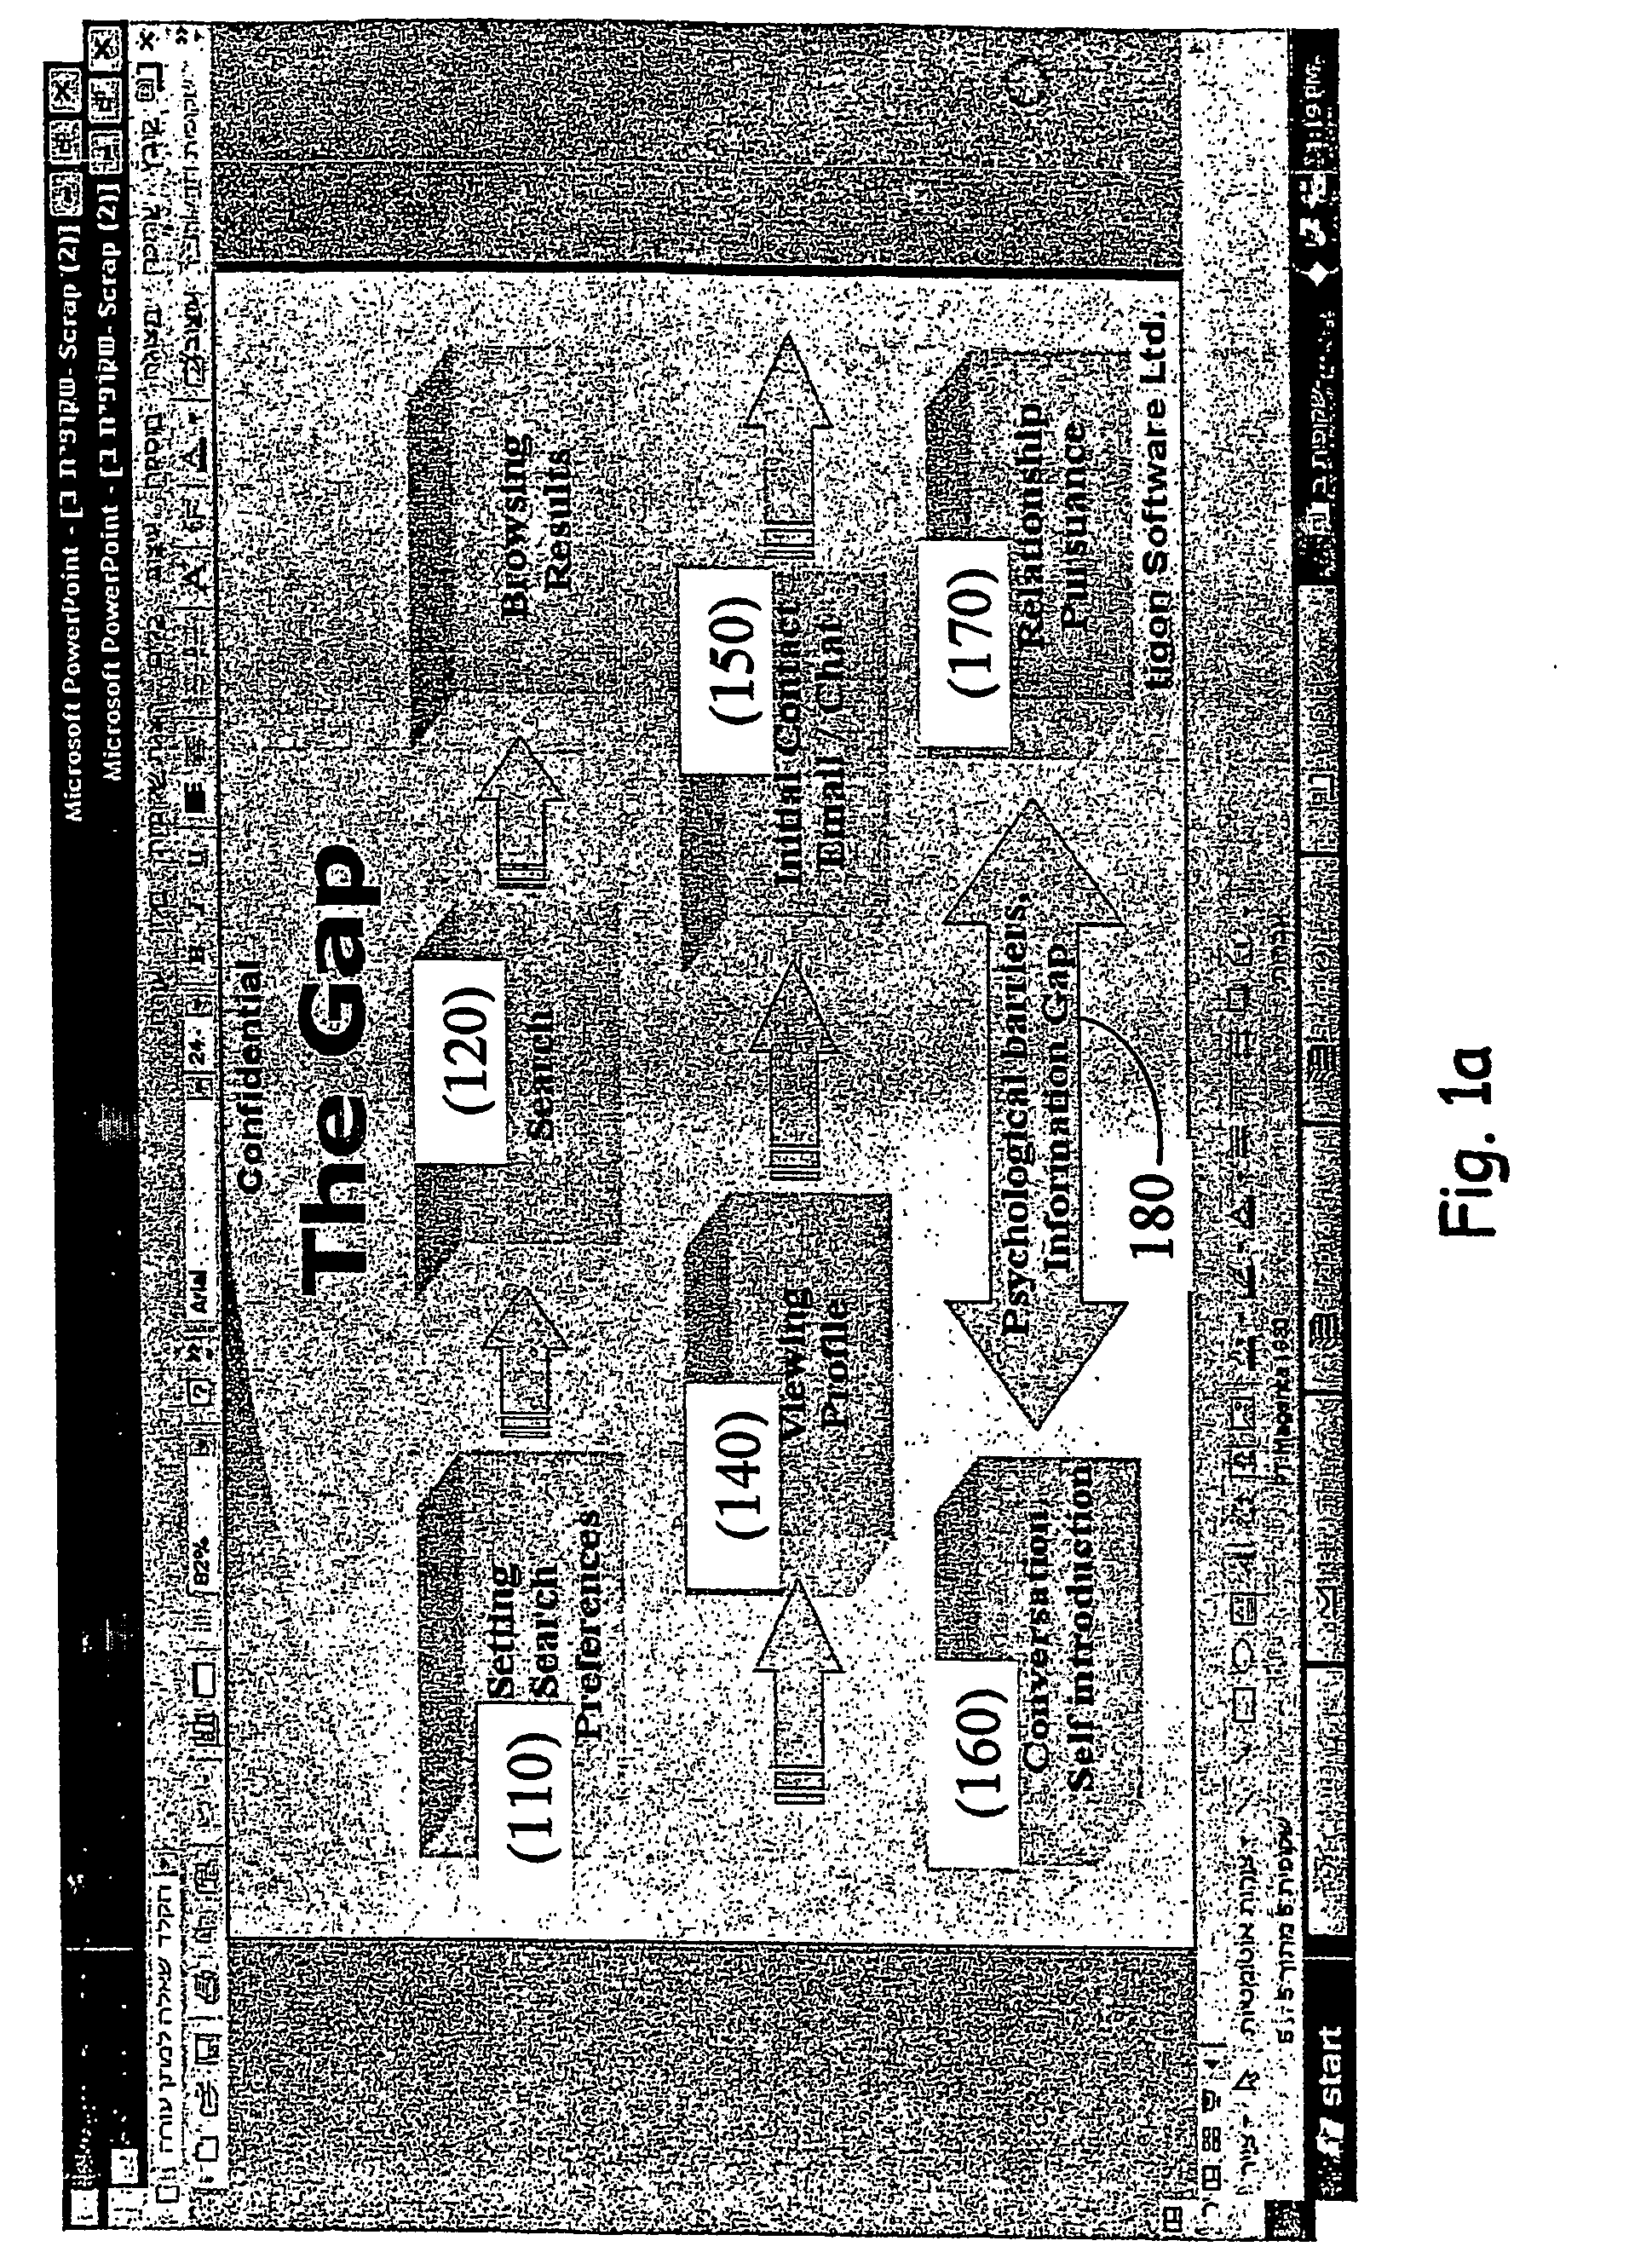 Method and system for communication between parties